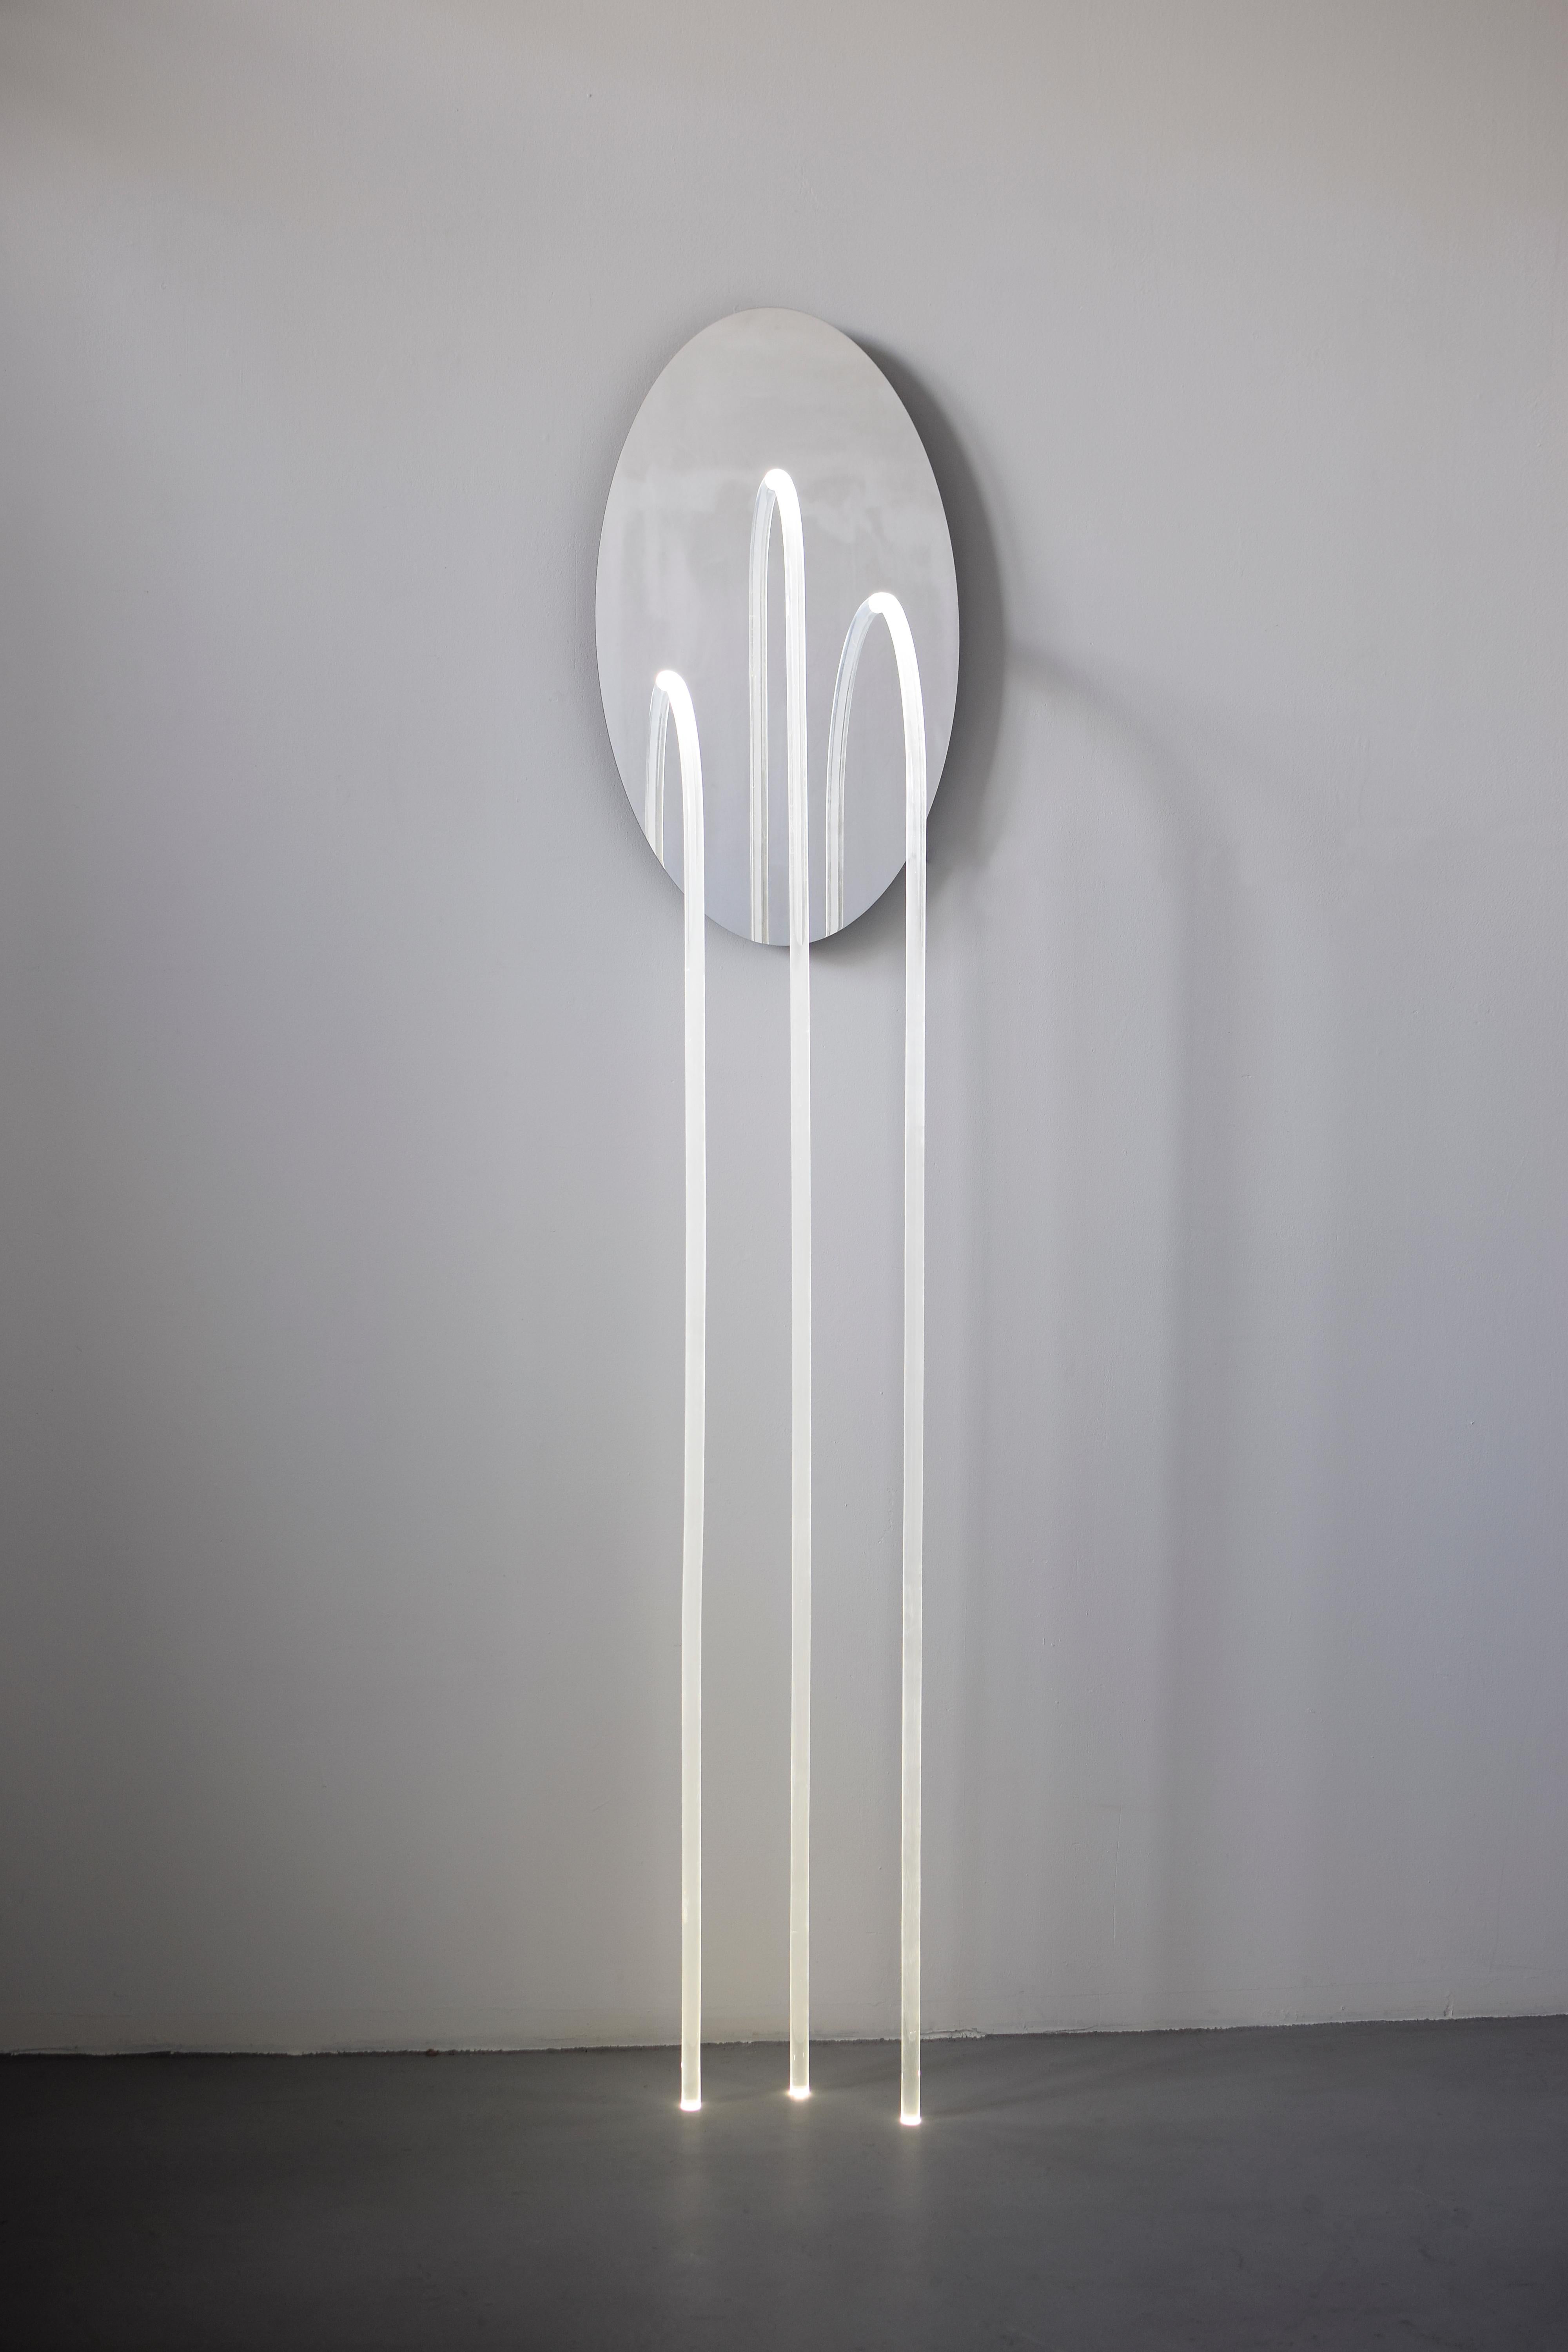 Original enlightened wall mirror, Maximilian Michaelis
 
Title: The elusive nature of perception, No. 06

Measures: ca. 40 x 200 x 30 cm

Material: polished stainless steel, Belgian bluestone, acrylic glass, Led

The basis and inspiration